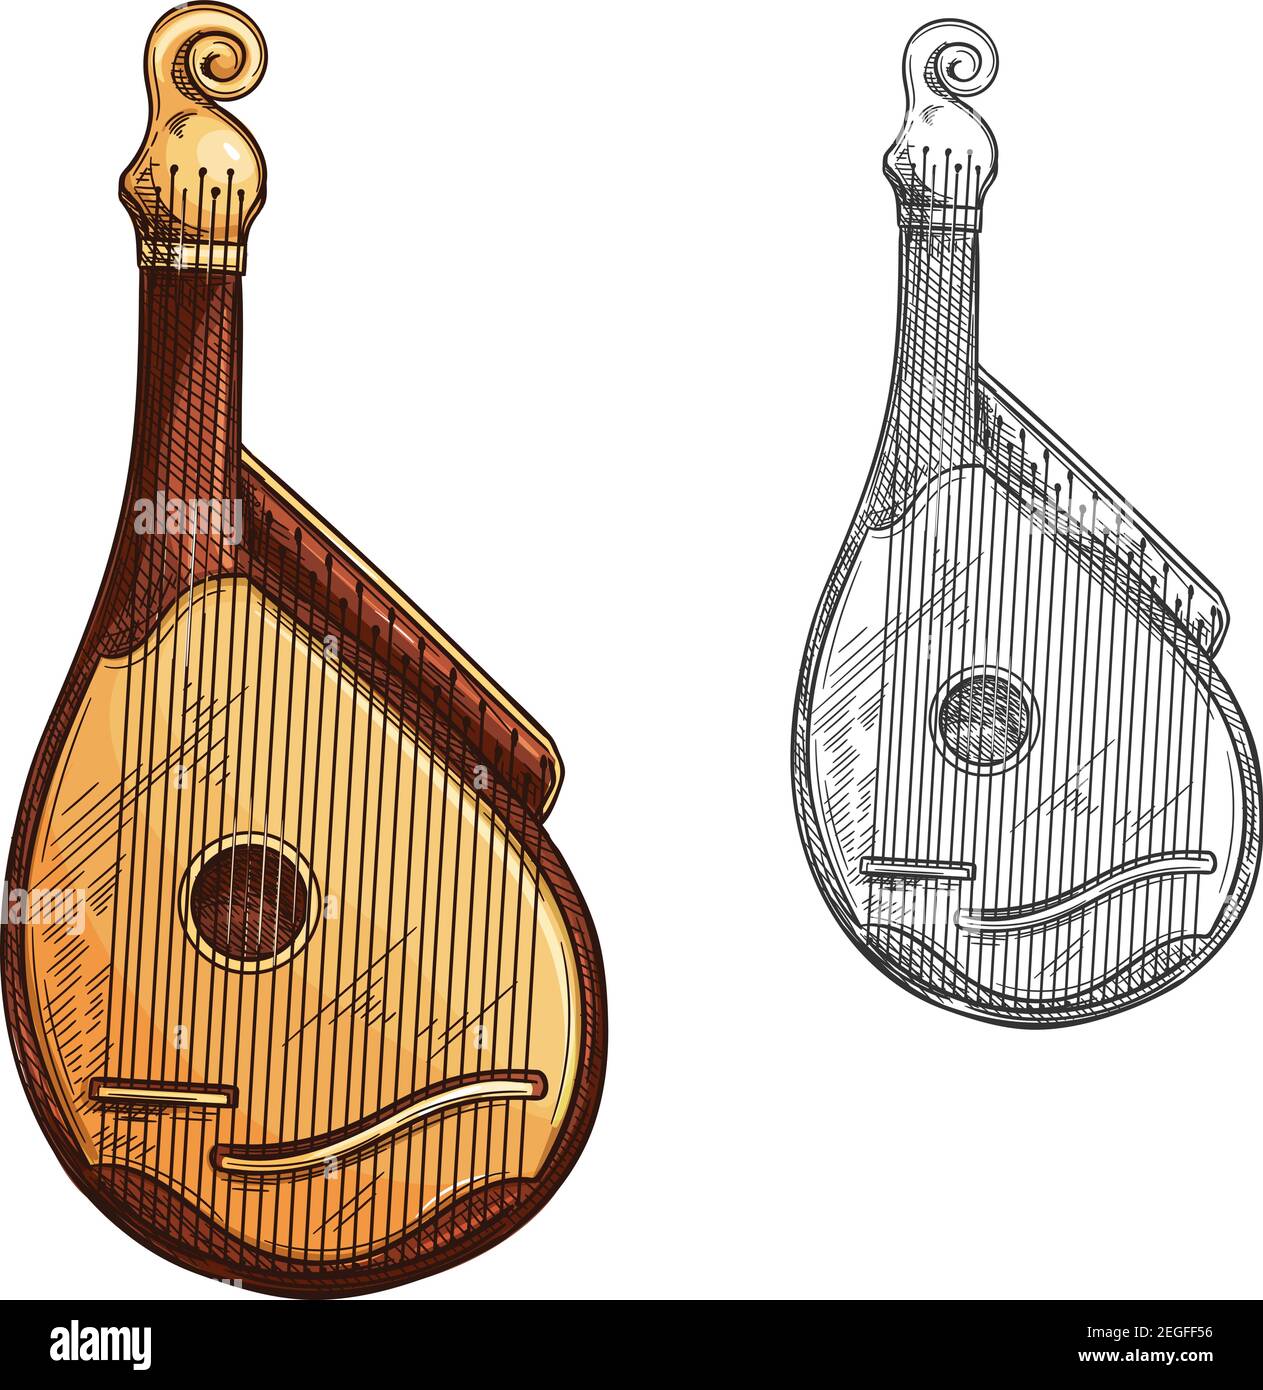 Bandura ukrainian musical instrument isolated sketch. Bandura or kobza plucked string folk instrument of Ukraine with wooden body and strings for ethn Stock Vector